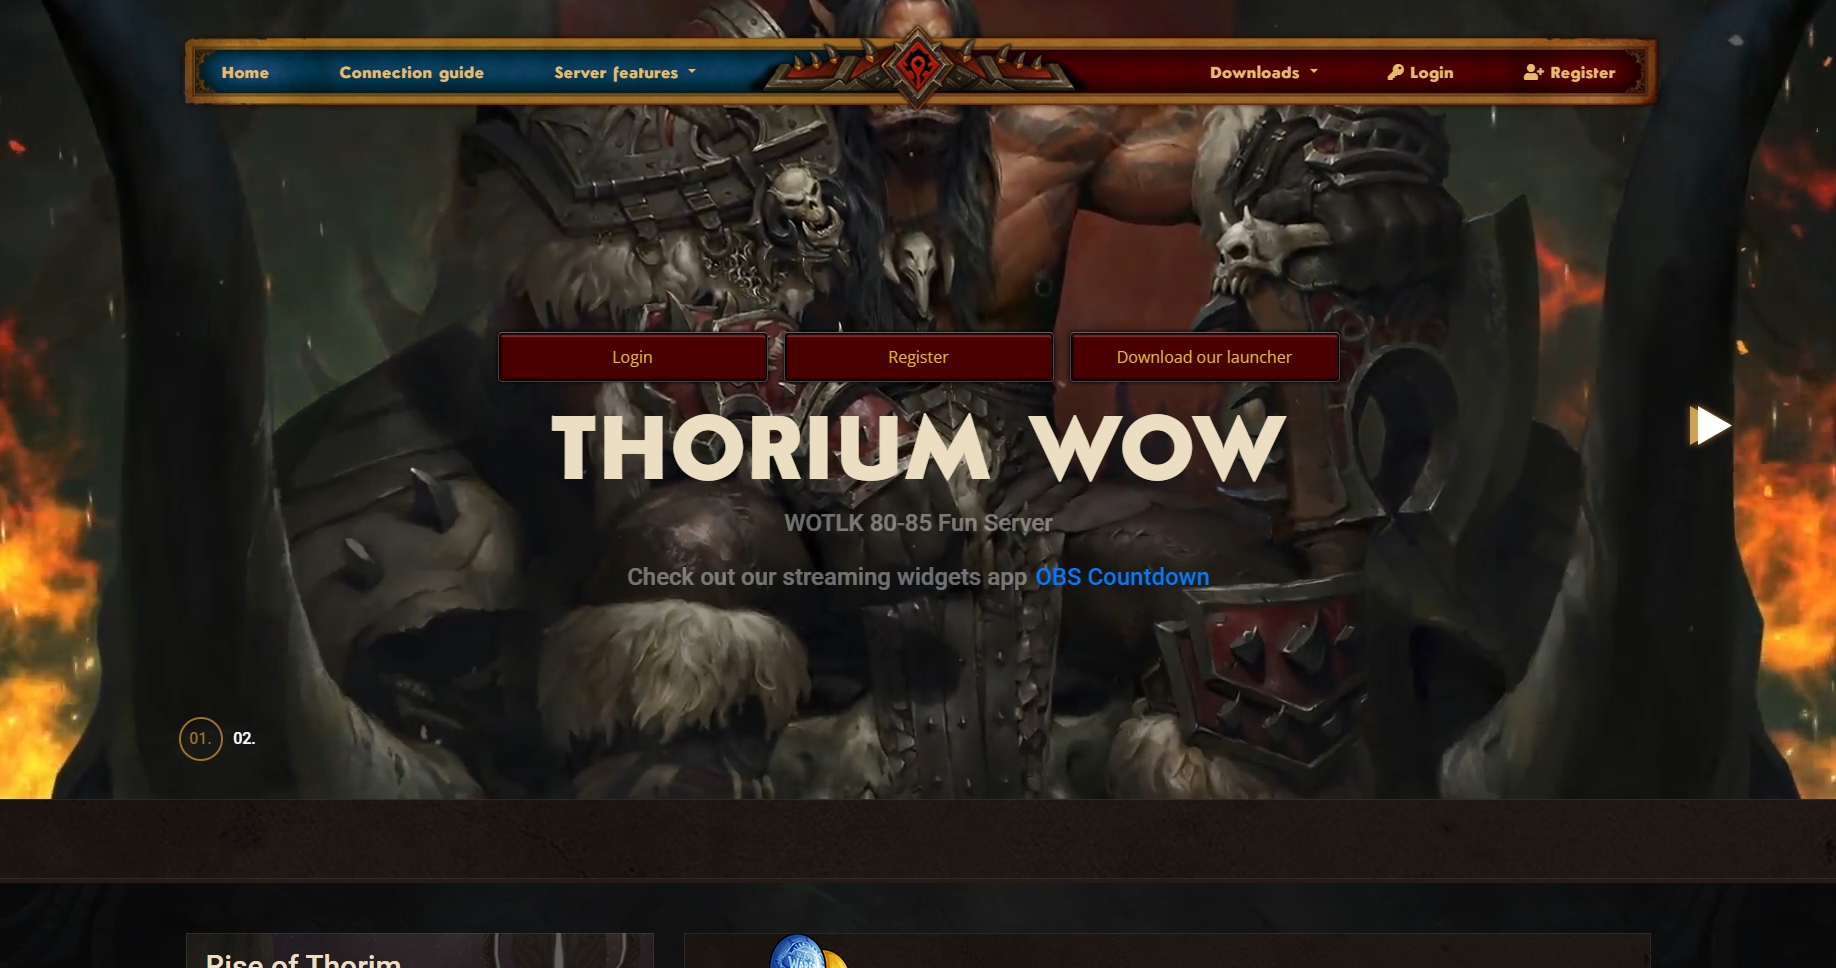 🛡️ThoriumWoW: The Art of World of Warcraft 3.3.5a with x1 rate!⚡